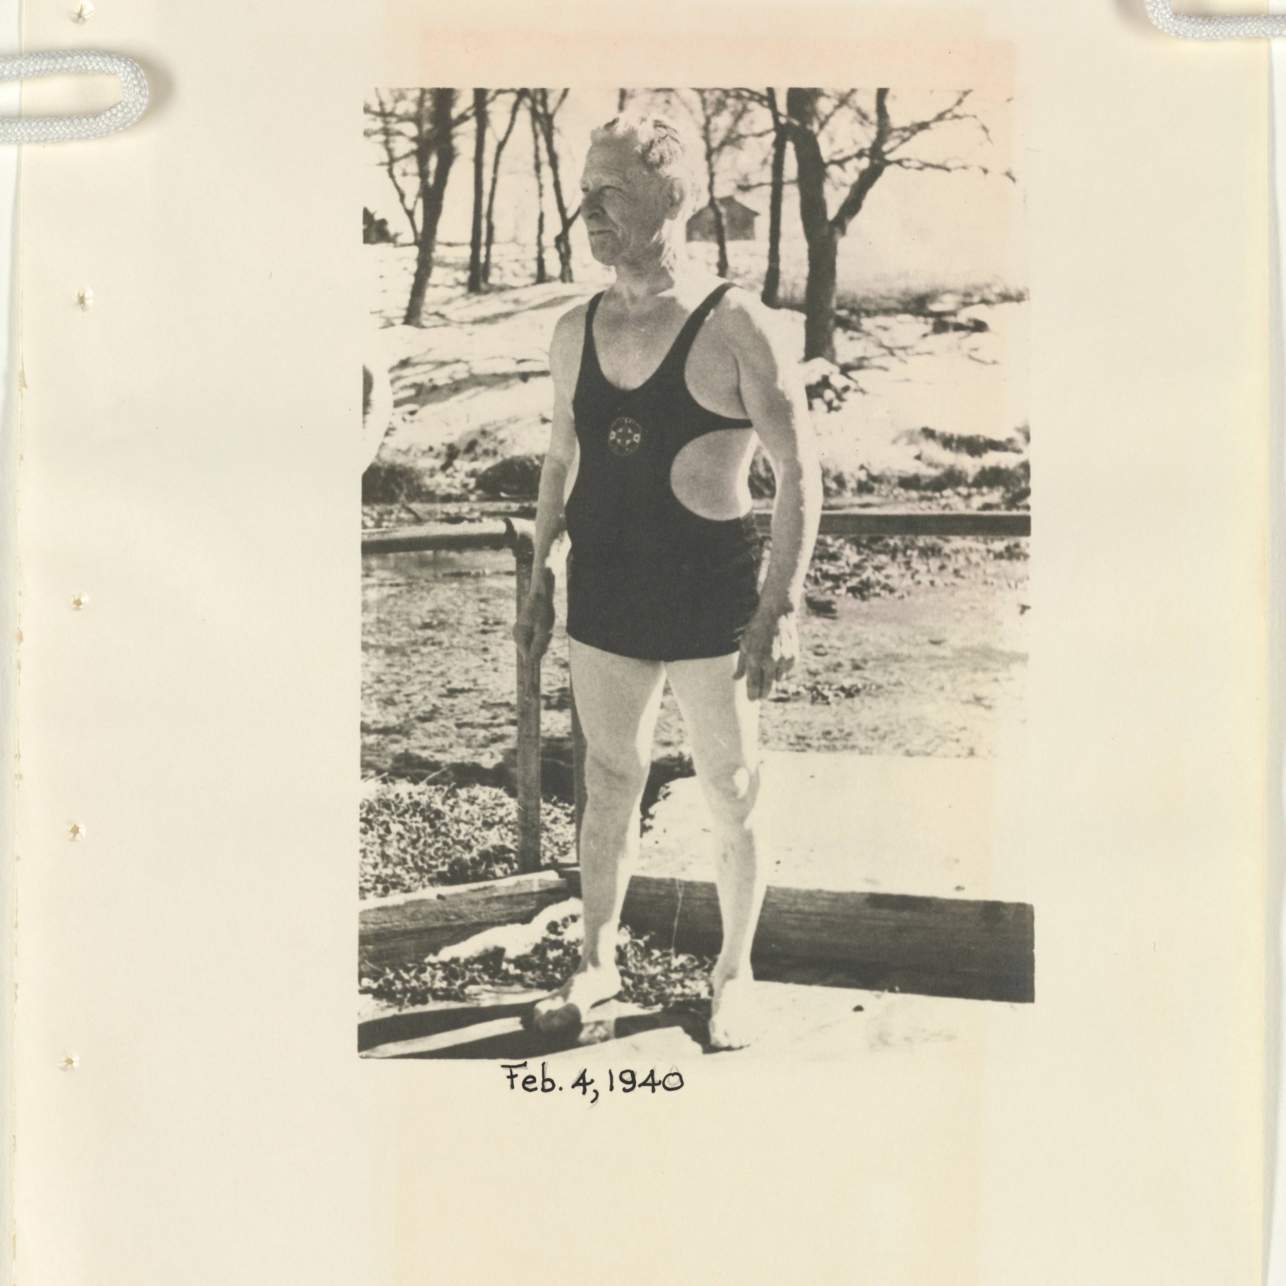 mathematics professor Dr. S.M. “Froggy” Sewell wears his bathing suit at riverside